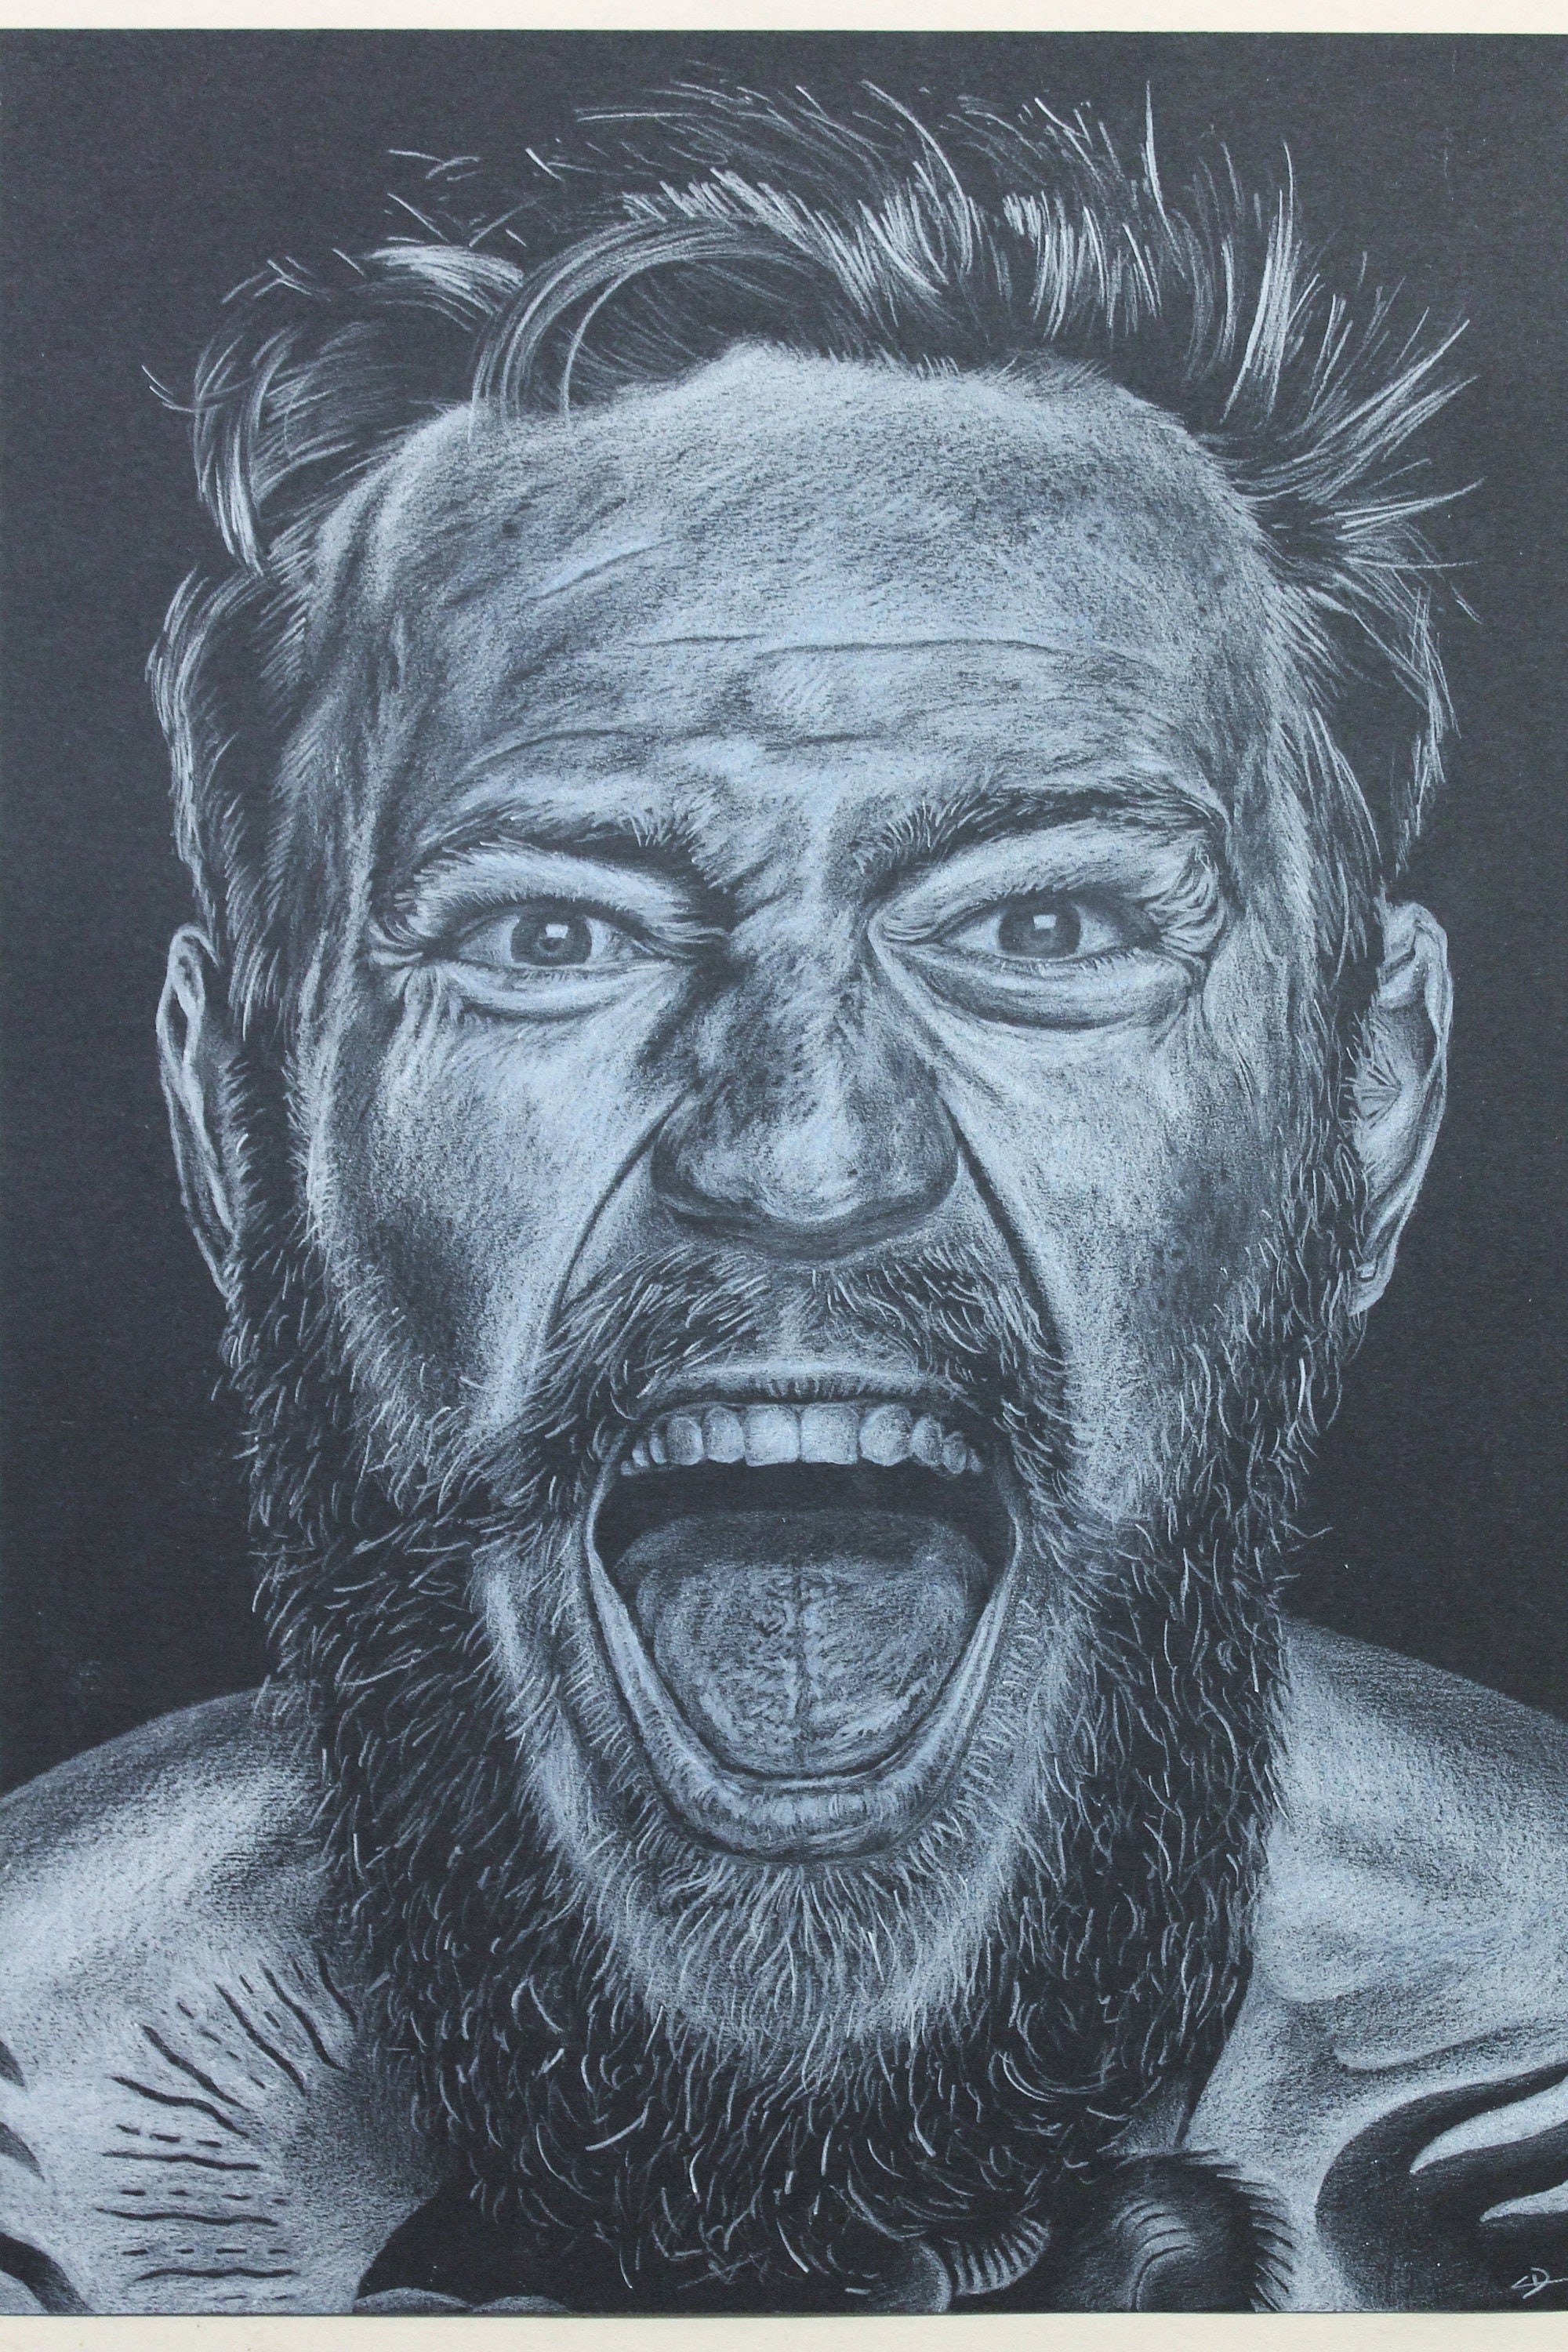 Conor Mcgregor charcoal drawing by Philipdraw on DeviantArt